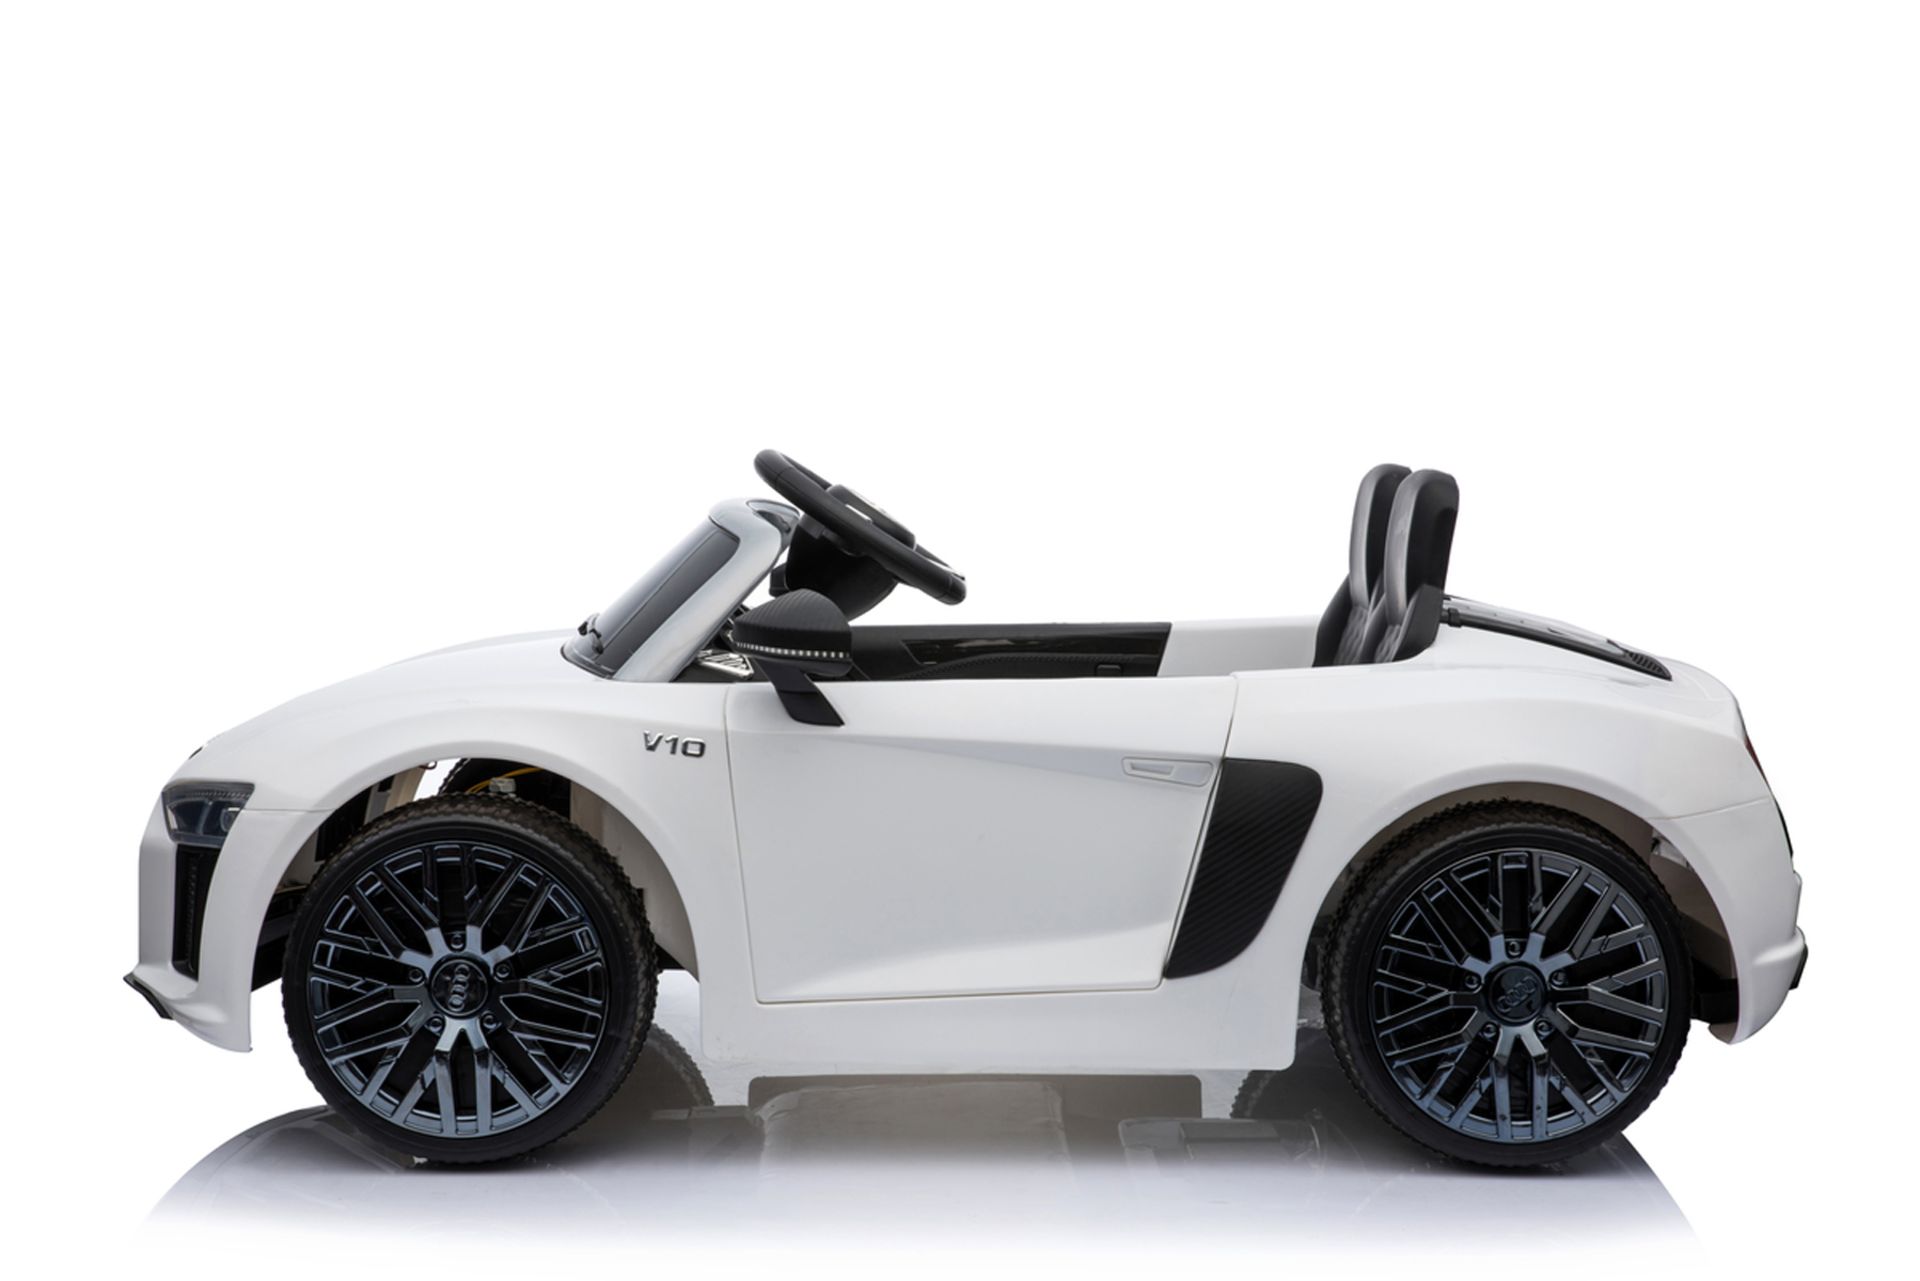 RIDE ON FULLY LICENSED AUDI R8 SPYDER 6V WITH PARENTAL REMOTE CONTROL - WHITE - Image 7 of 8